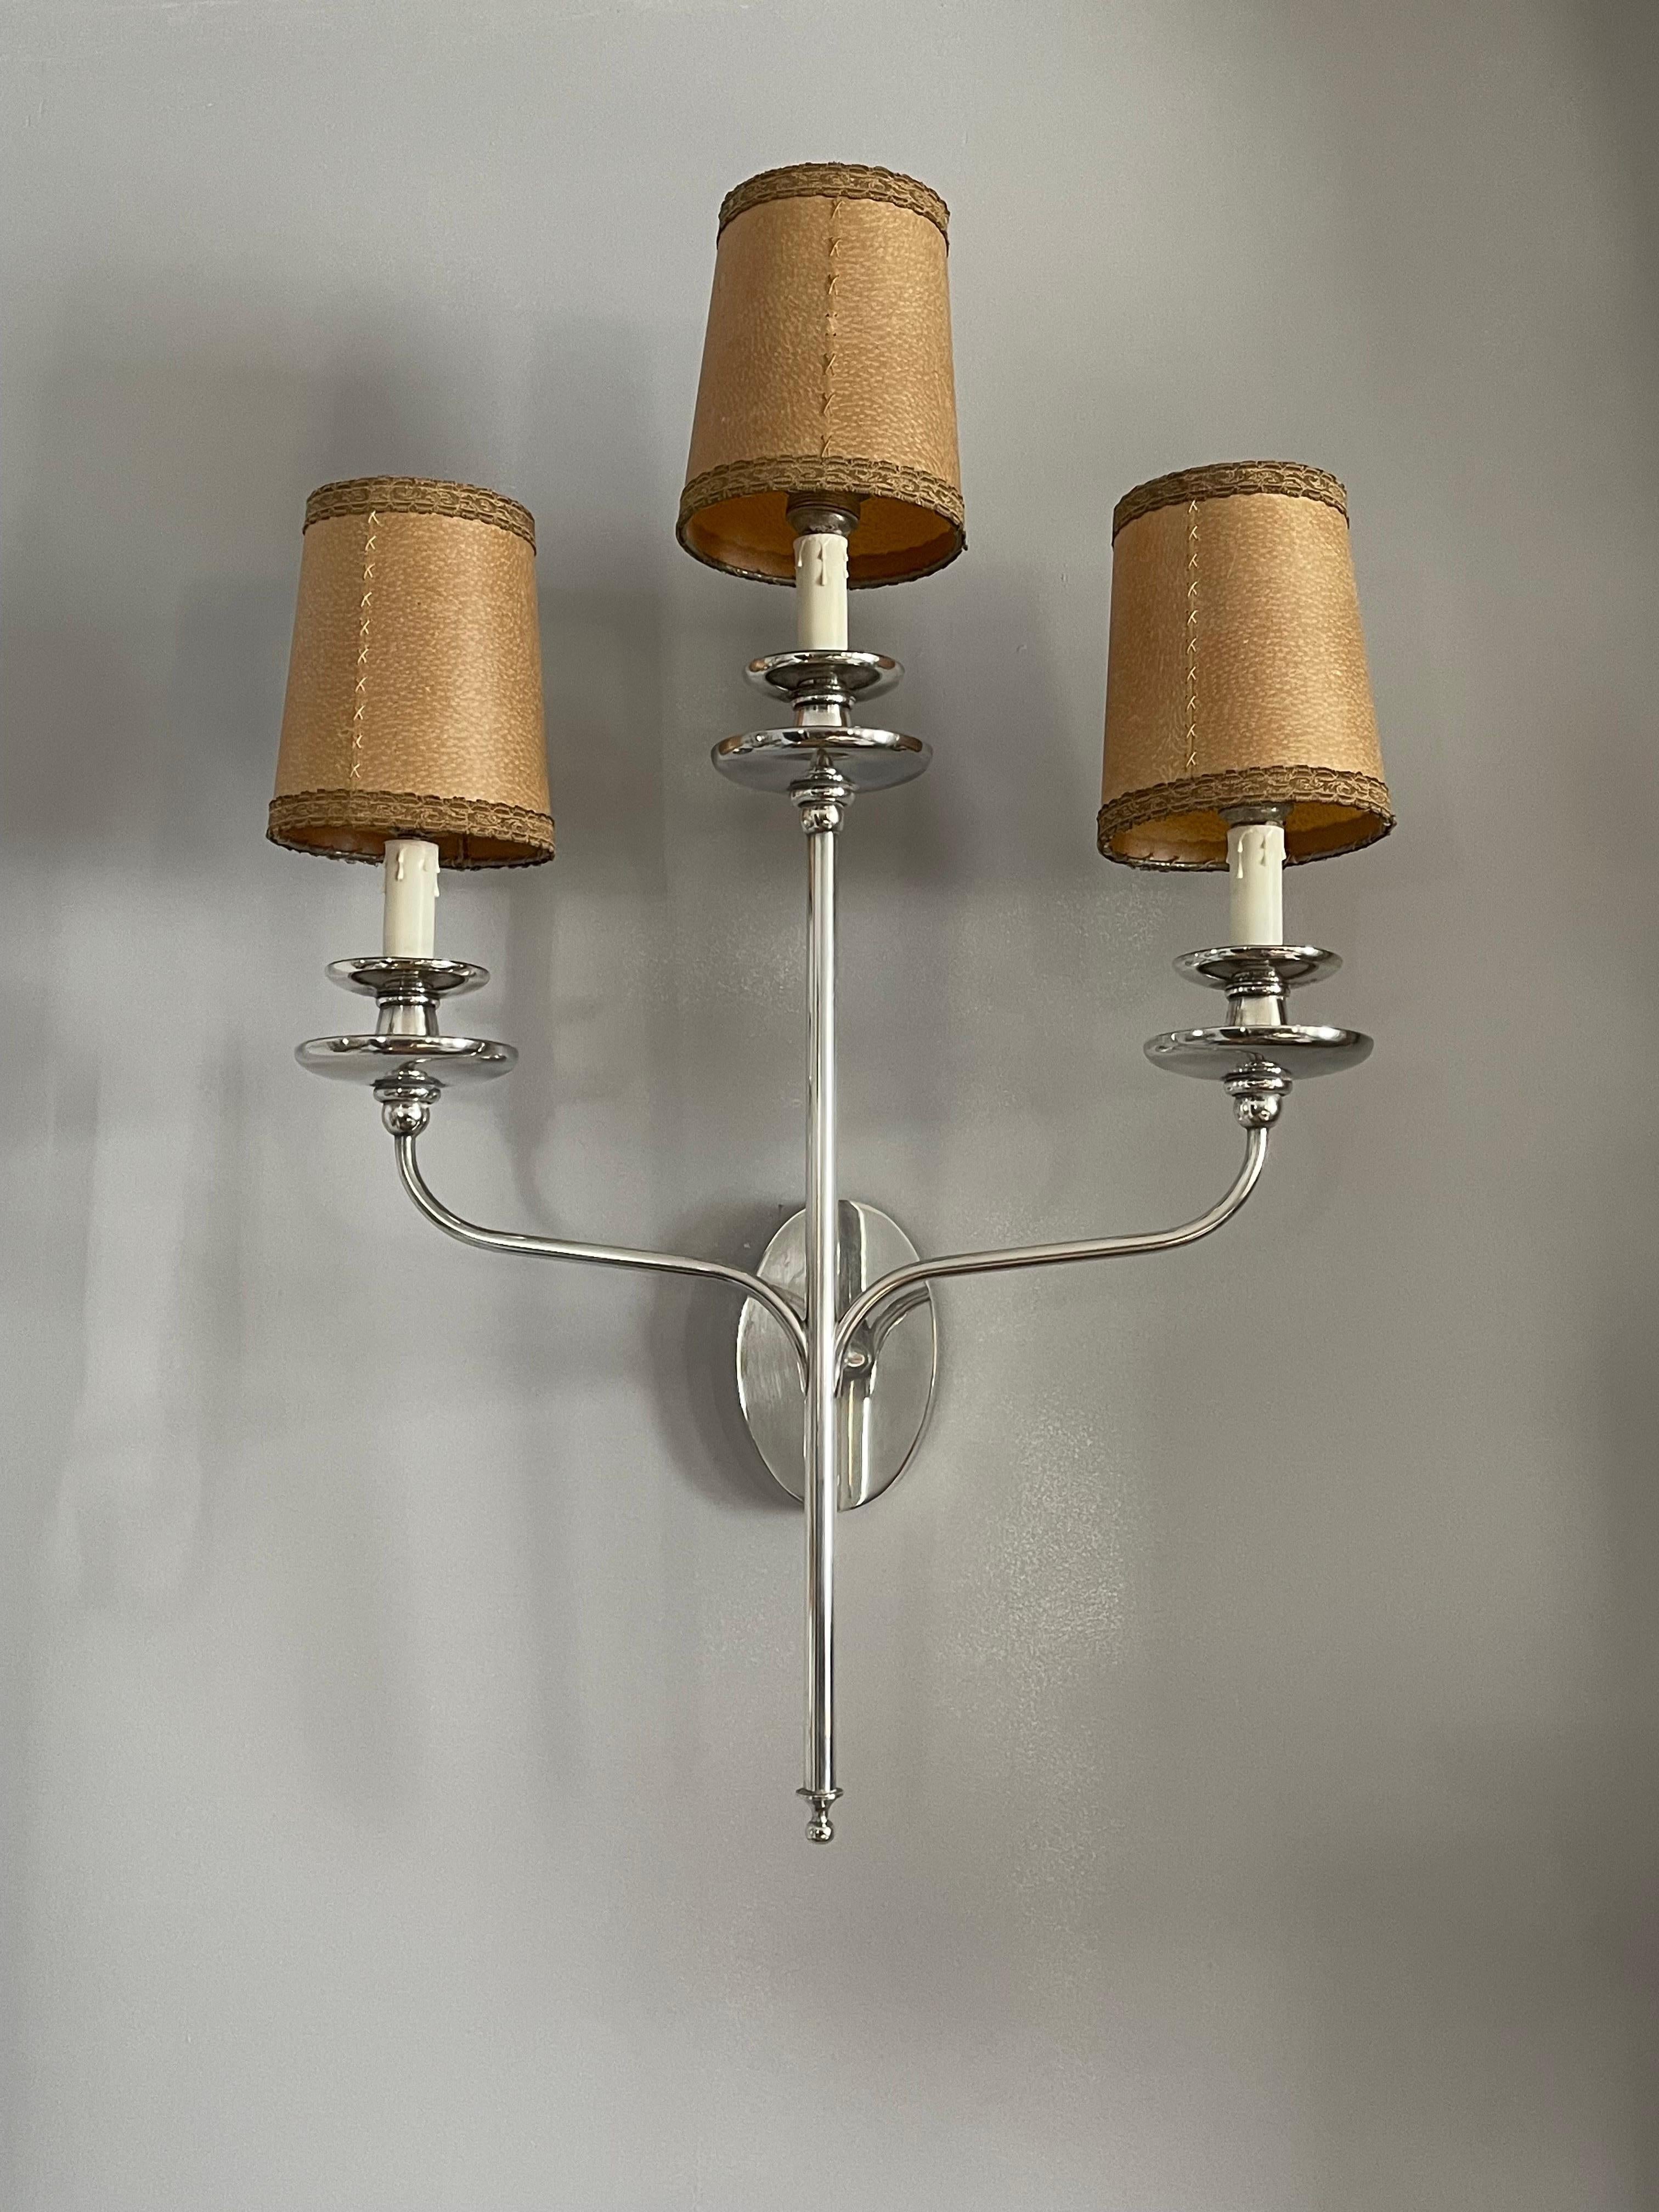 A Large Pair of American Art Deco silver plated wall sconces with original parchment hand stitched shades. 
The 900 silver plating on bronze is in great condition with exception of one one inch long scratch down to the bronze. 
They have been